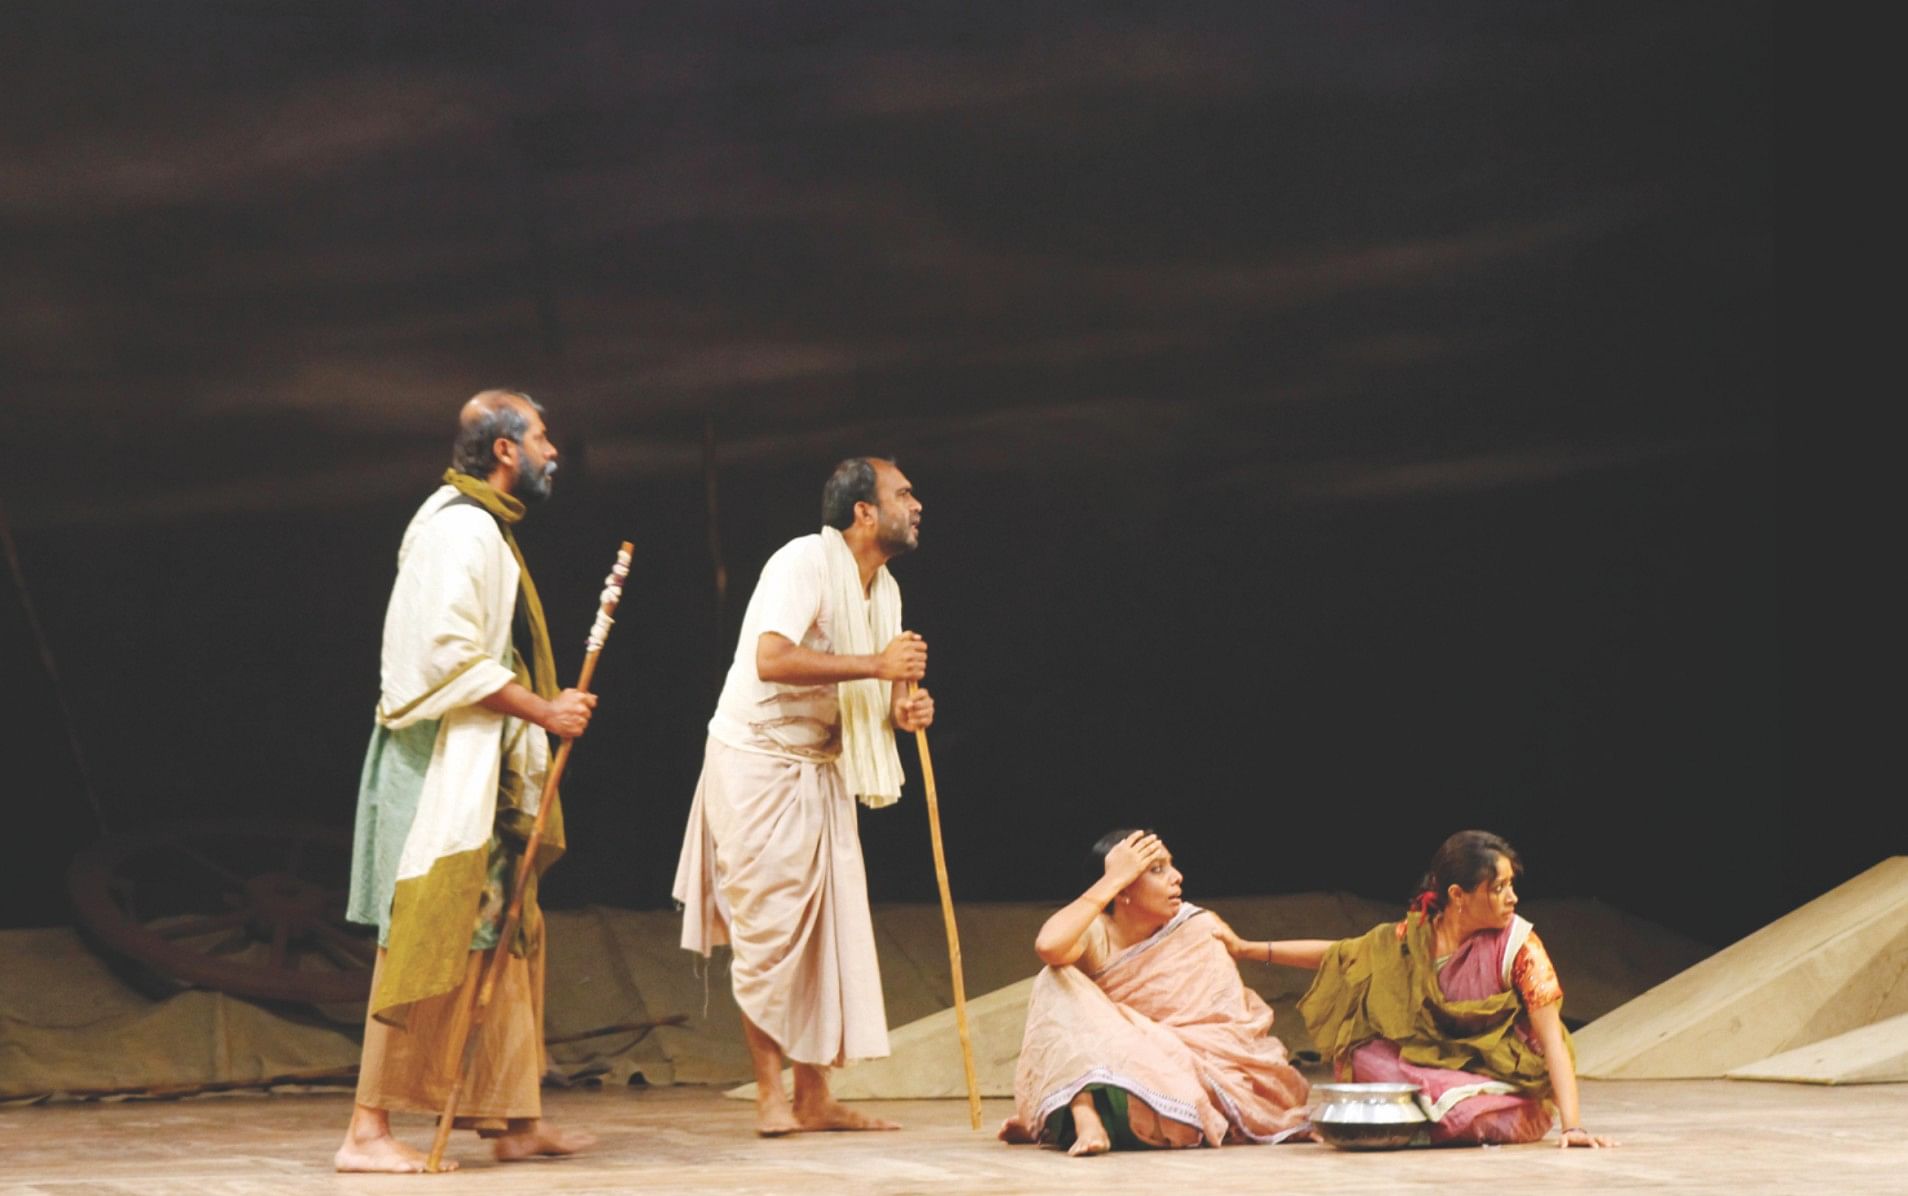 Dhaka district's repertory production for the festival, “Badh”, was premiered recently. The play will be staged on the closing day of the festival. 